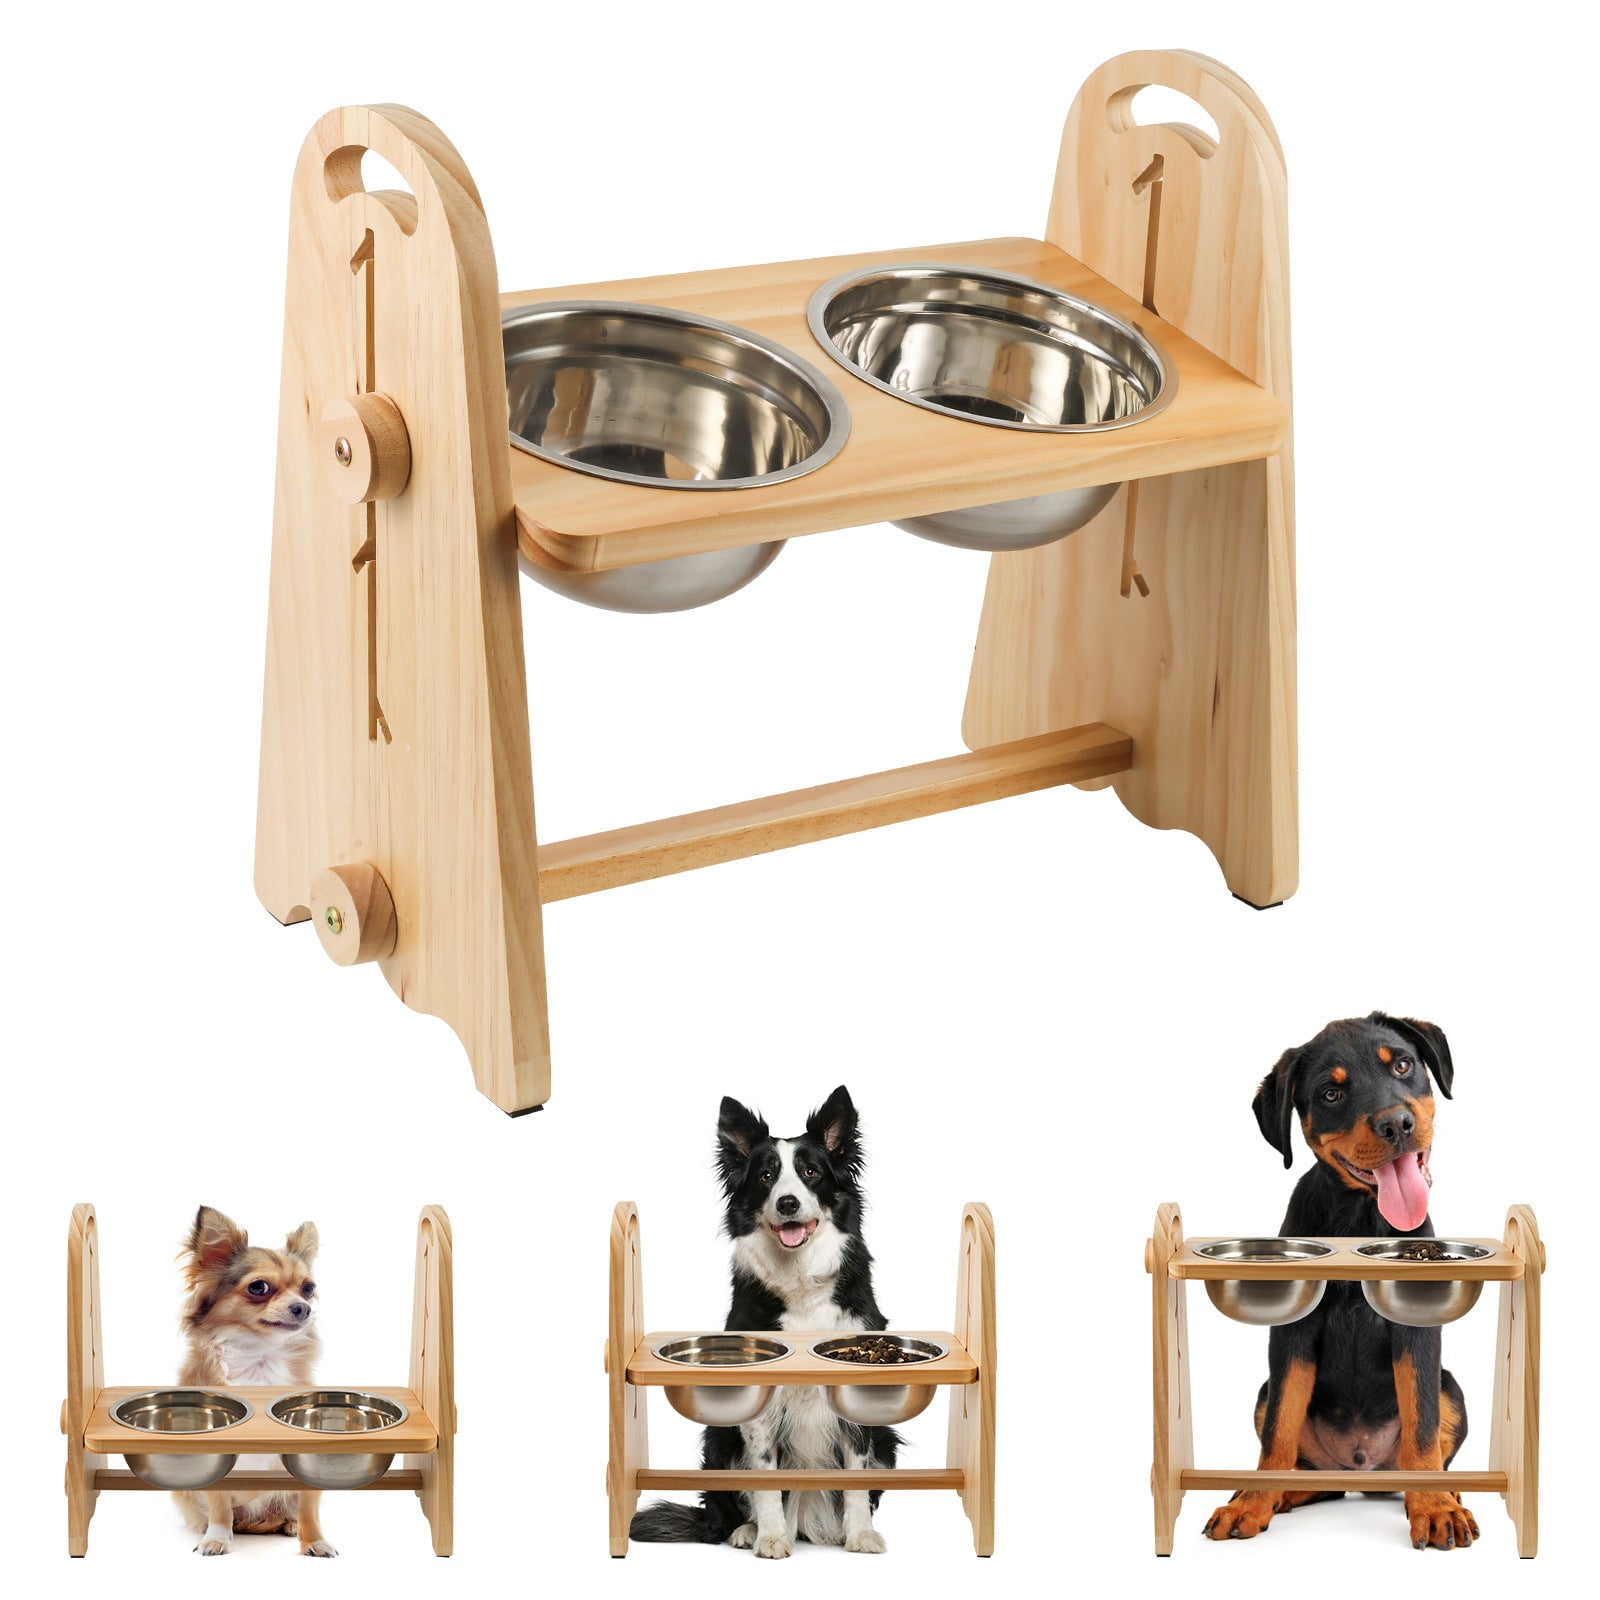 ZPirates Dog Bowl Stand for Large Dogs - Height 14-Inch, Adjustable, 8-11 inch Wide with Lock - Raises, Elevates Pet Food, Fountain and Water Feeders